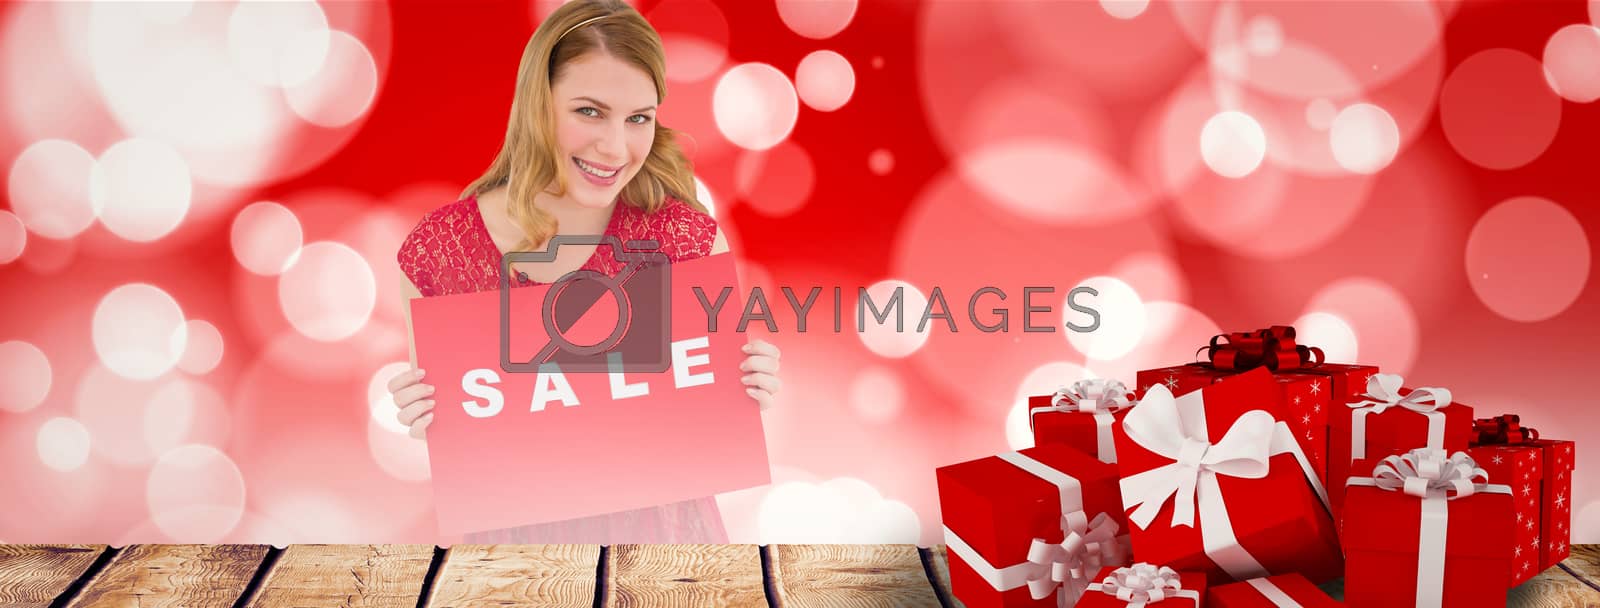 Royalty free image of Composite image of smiling blonde showing a red sale poster by Wavebreakmedia